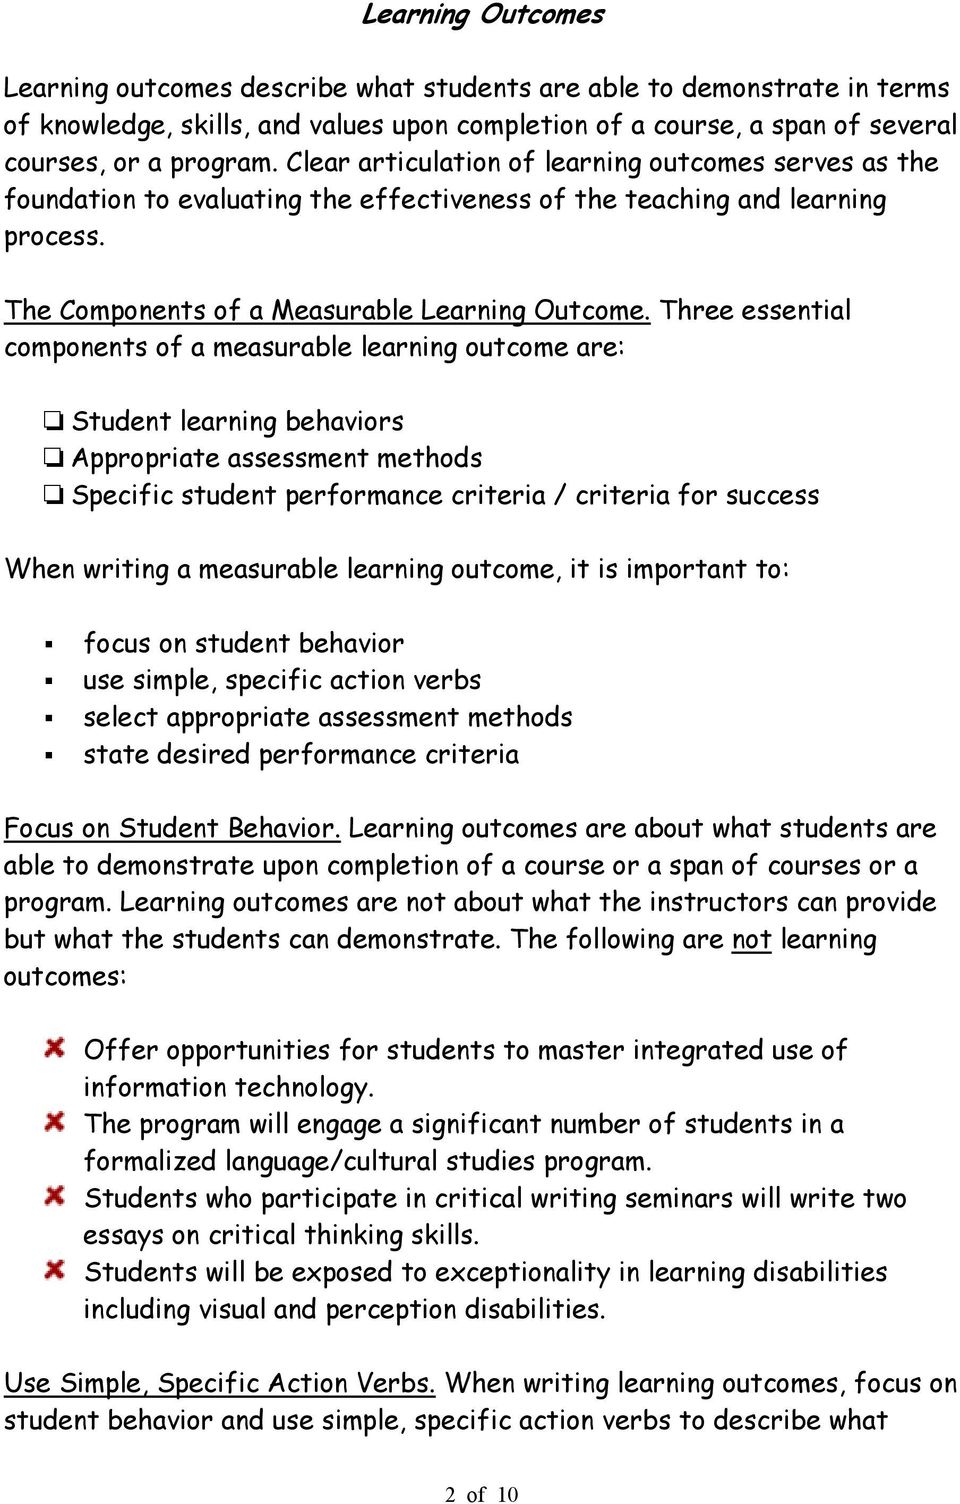 Writing Measurable Learning Outcomes - PDF Free Download